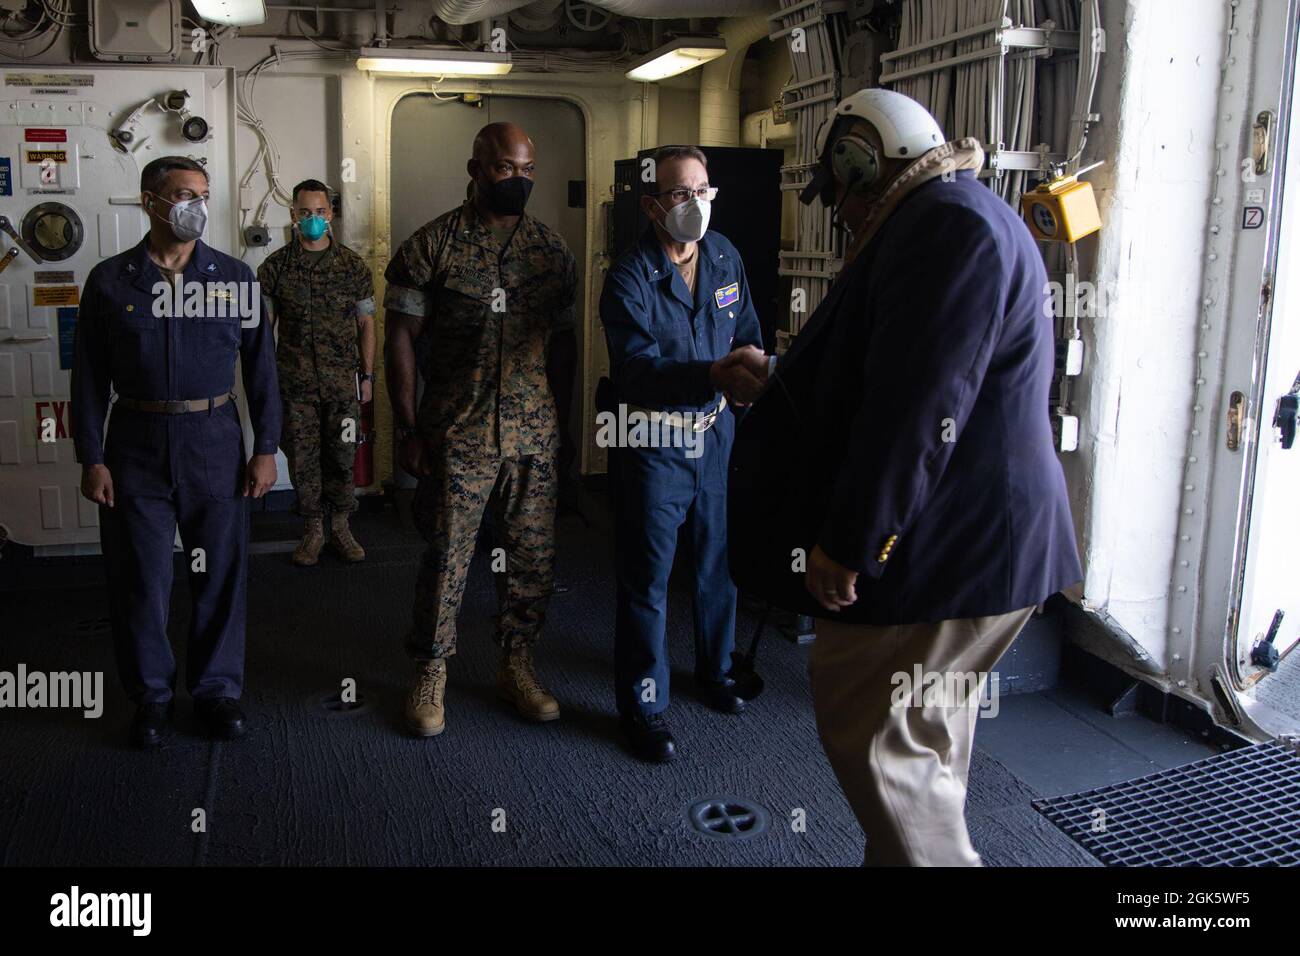 U.S. Secretary of the Navy Carlos Del Toro is greeted by Marine Corps and Navy leaders aboard the USS Kearsarge during Large Scale Exercise (LSE) 2021, off the coast of North Carolina, Aug. 10, 2021. II MEF is a maritime force inextricably linked to our Navy partners in U.S. 6th and 2nd Fleets, creating mutual interdependence with our Fleet counterparts leverages our collective capabilities and increases maritime lethality. LSE 2021 merges live and synthetic training capabilities to create an intense, robust training environment. Stock Photo